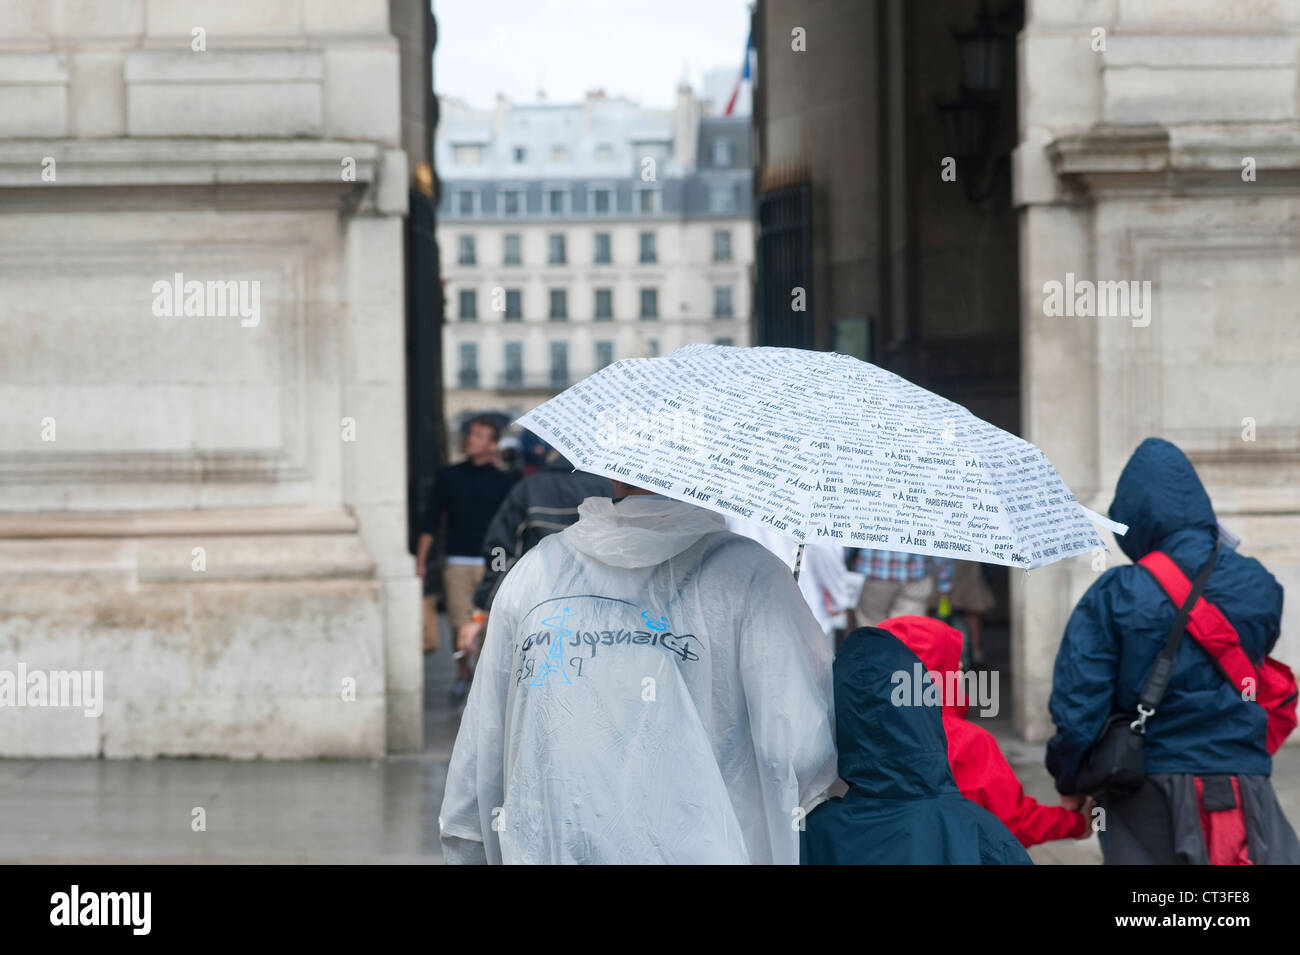 Paris, France - Tourists in a rainy day. Stock Photo